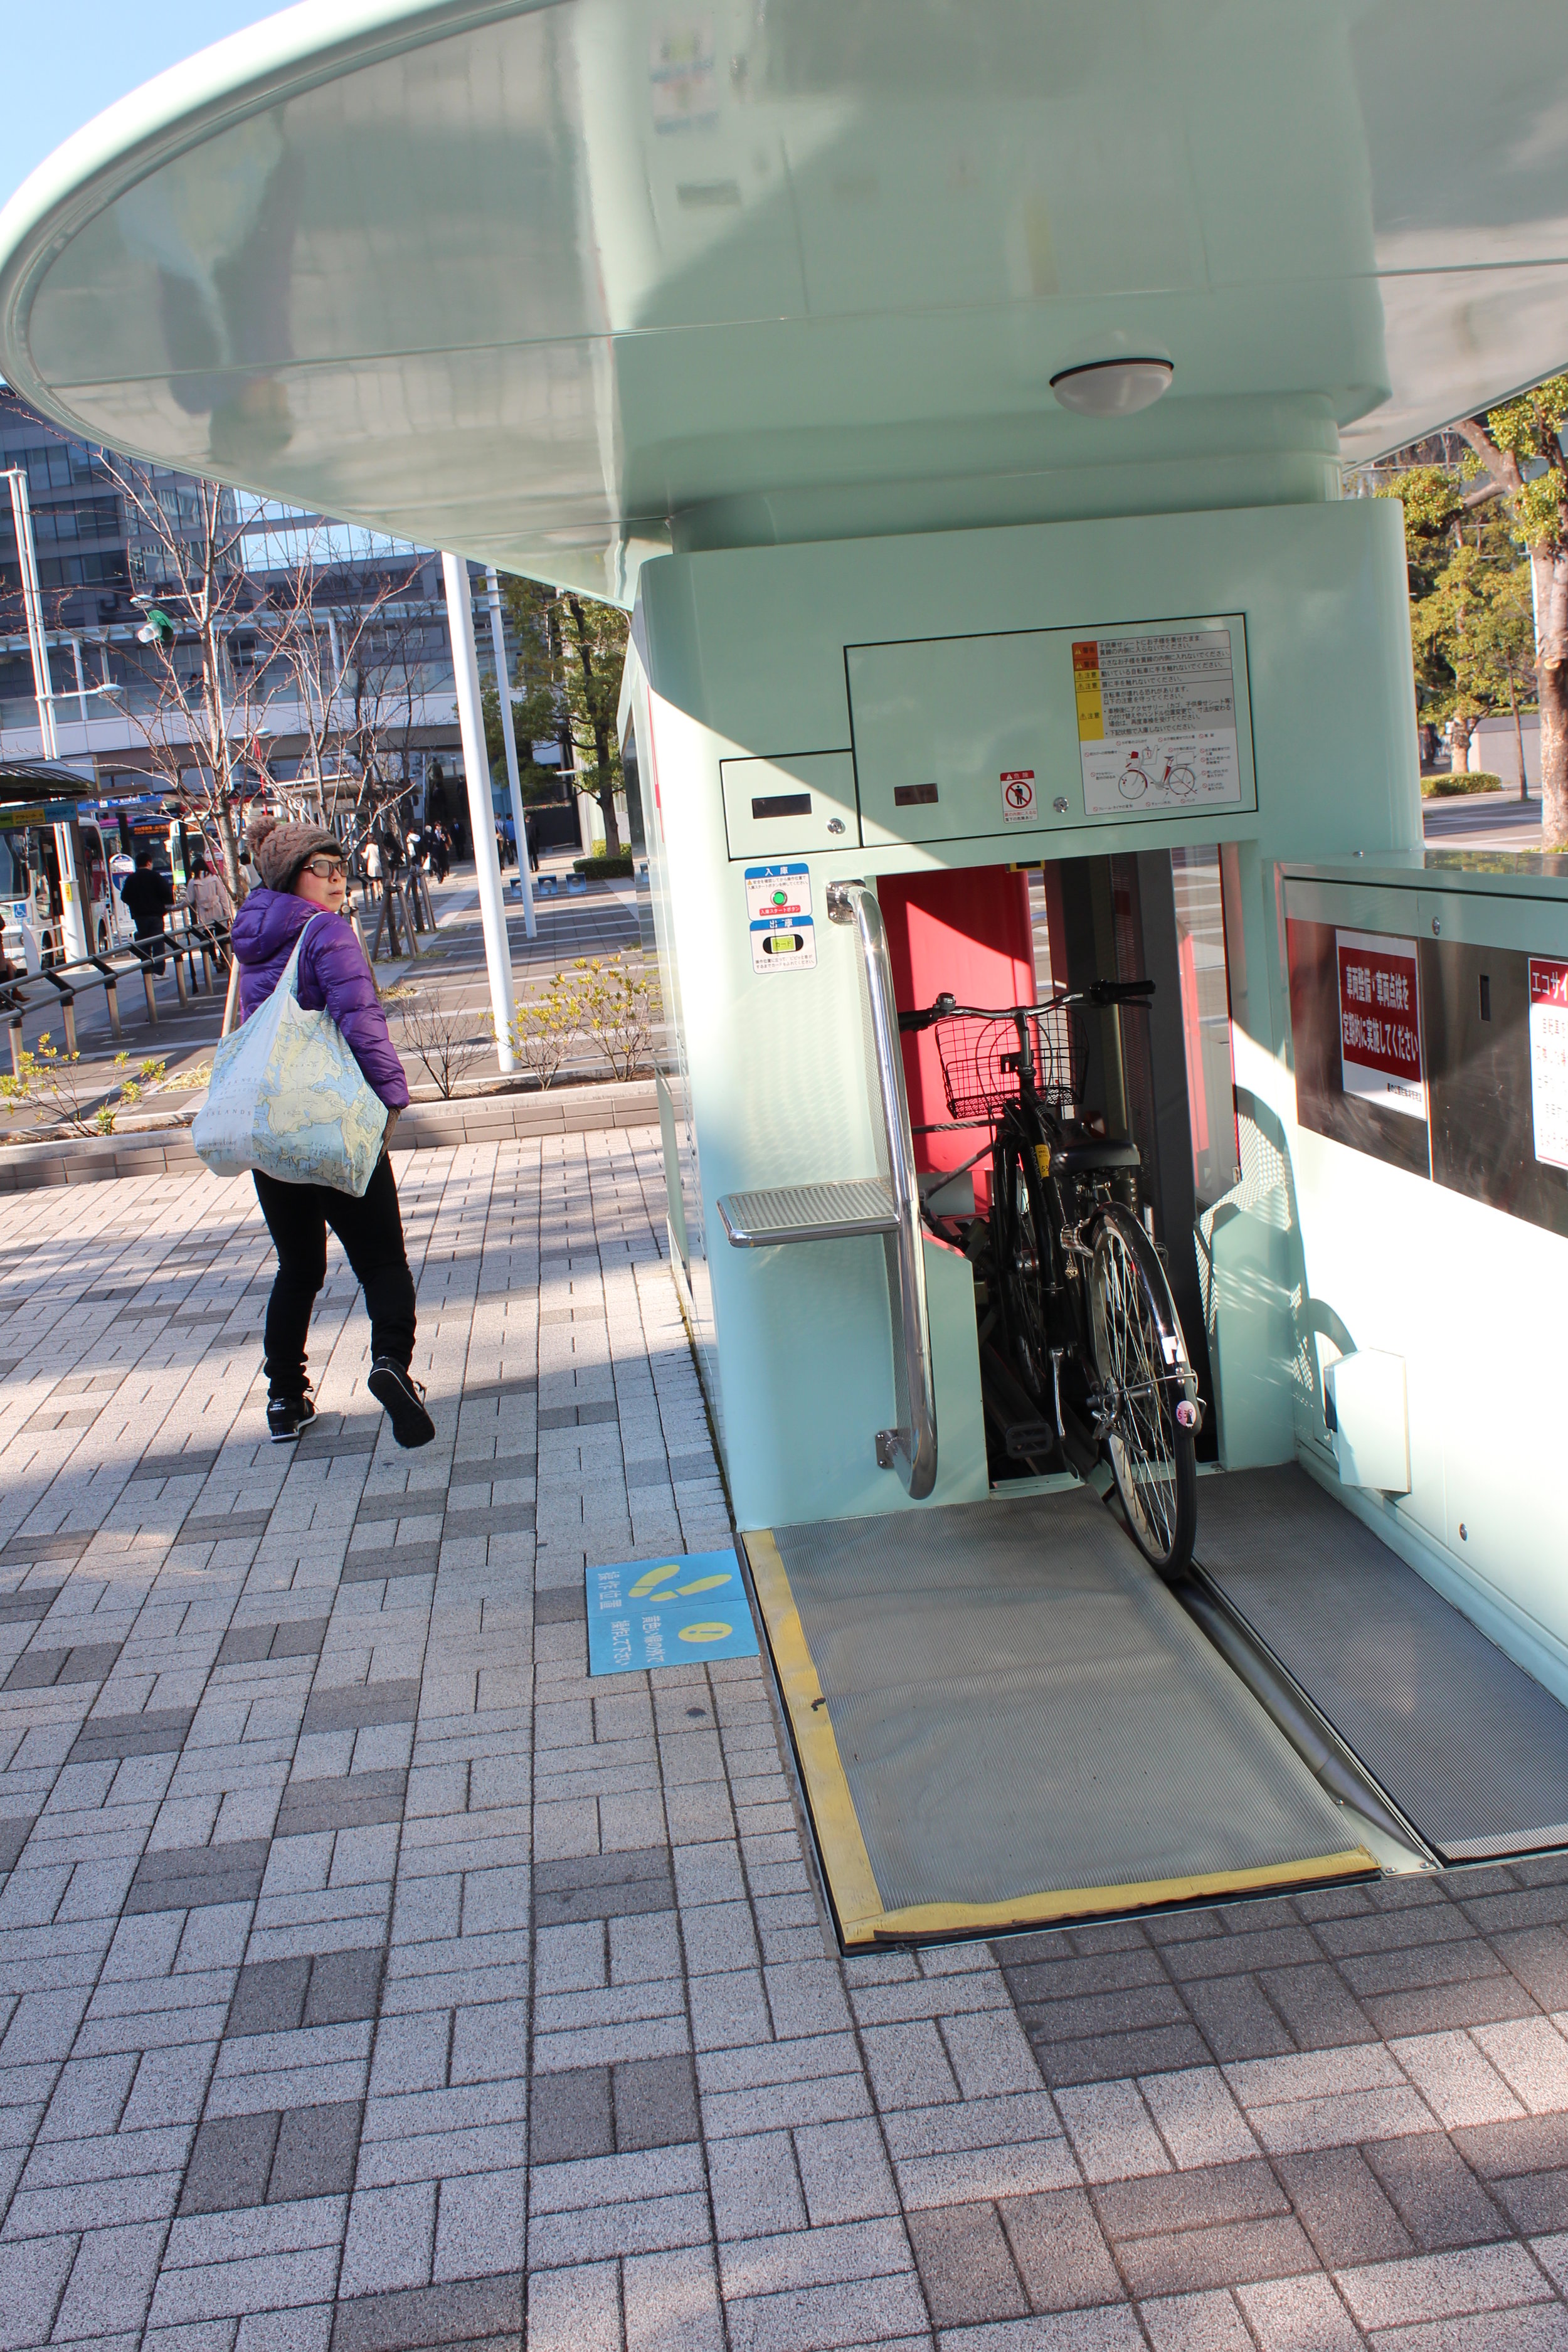  Amazing Tokyo bike parking pulls bike into device and in seconds it's in a secure underground carousel. 